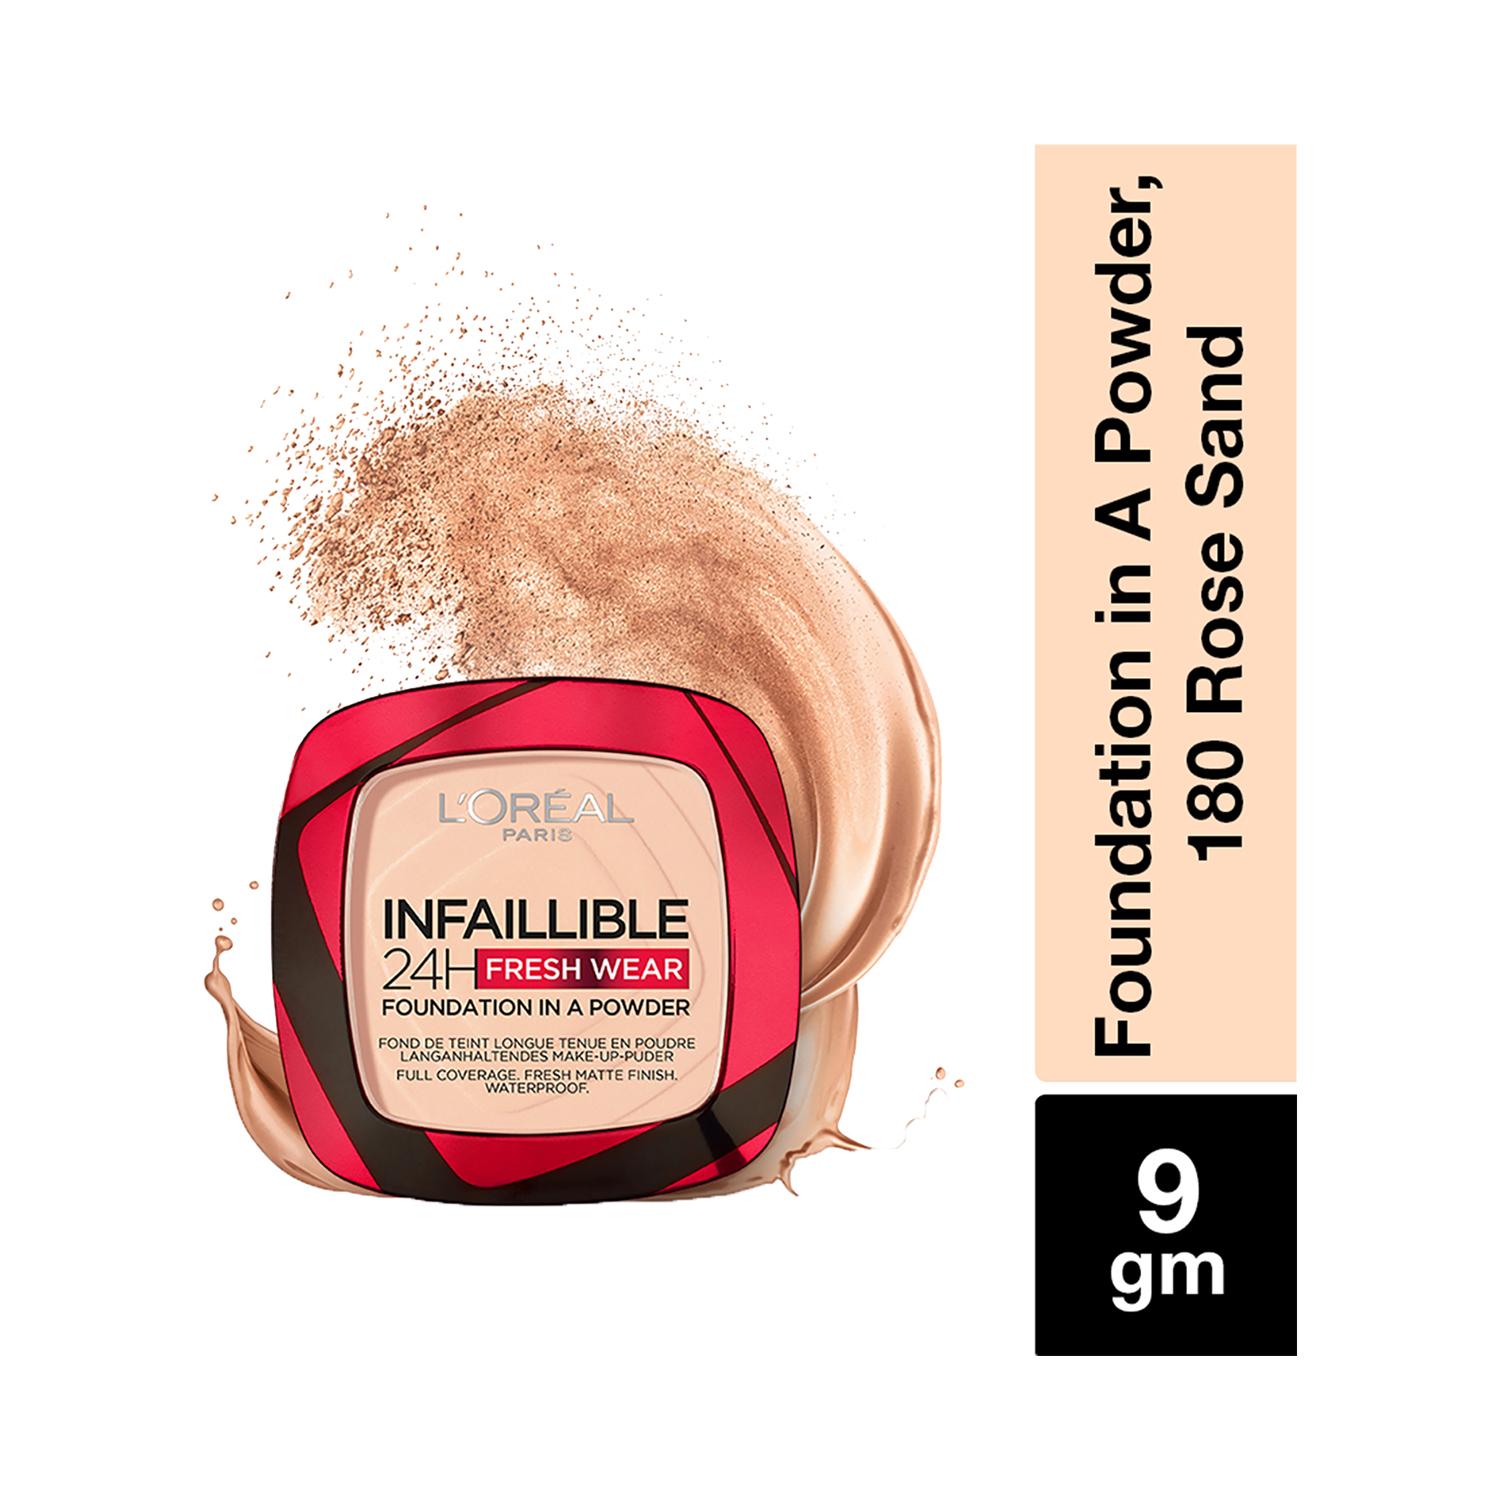 L'Oreal Paris Infallible 24H Fresh Wear Foundation In A Powder - 180 Rose Sand (9 g)